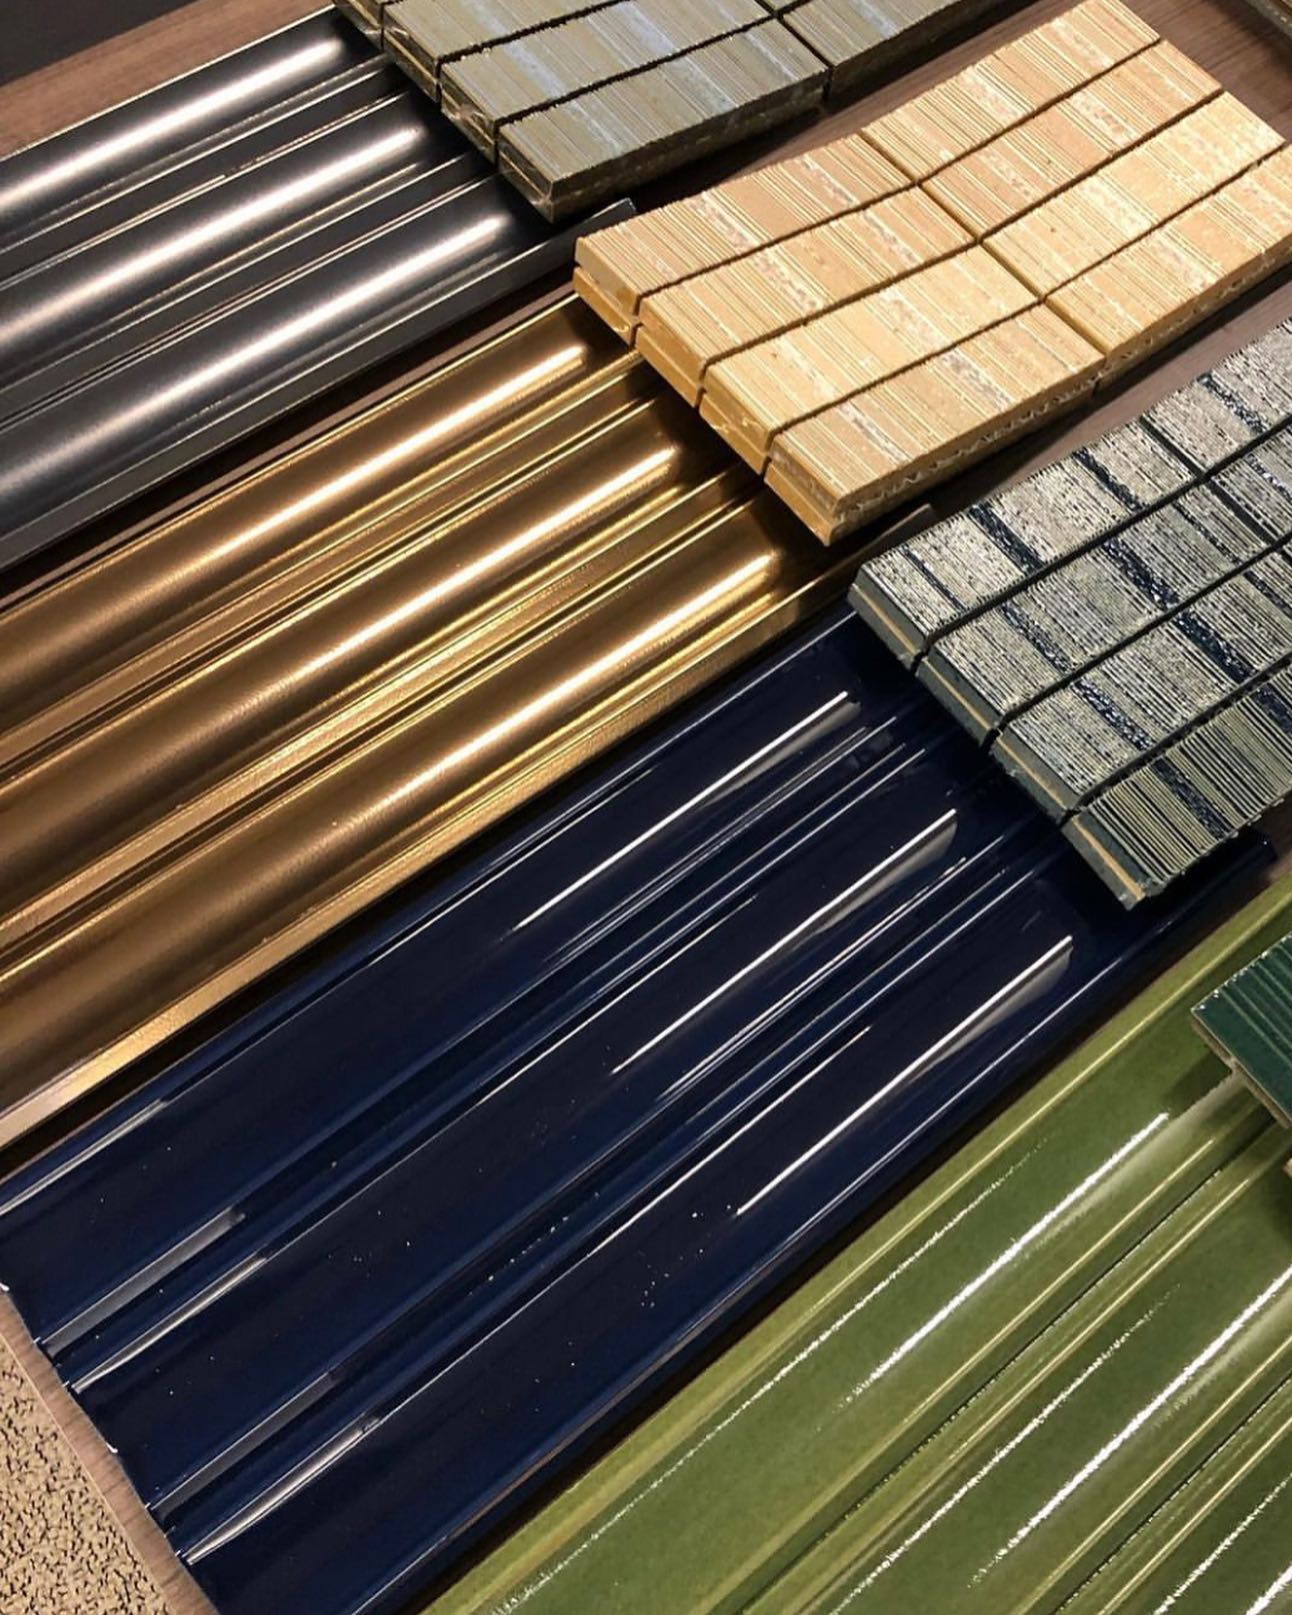 Giving us holiday color feels.✨🎄💙🤗
Ft. Tubage & Newtro #emsertile